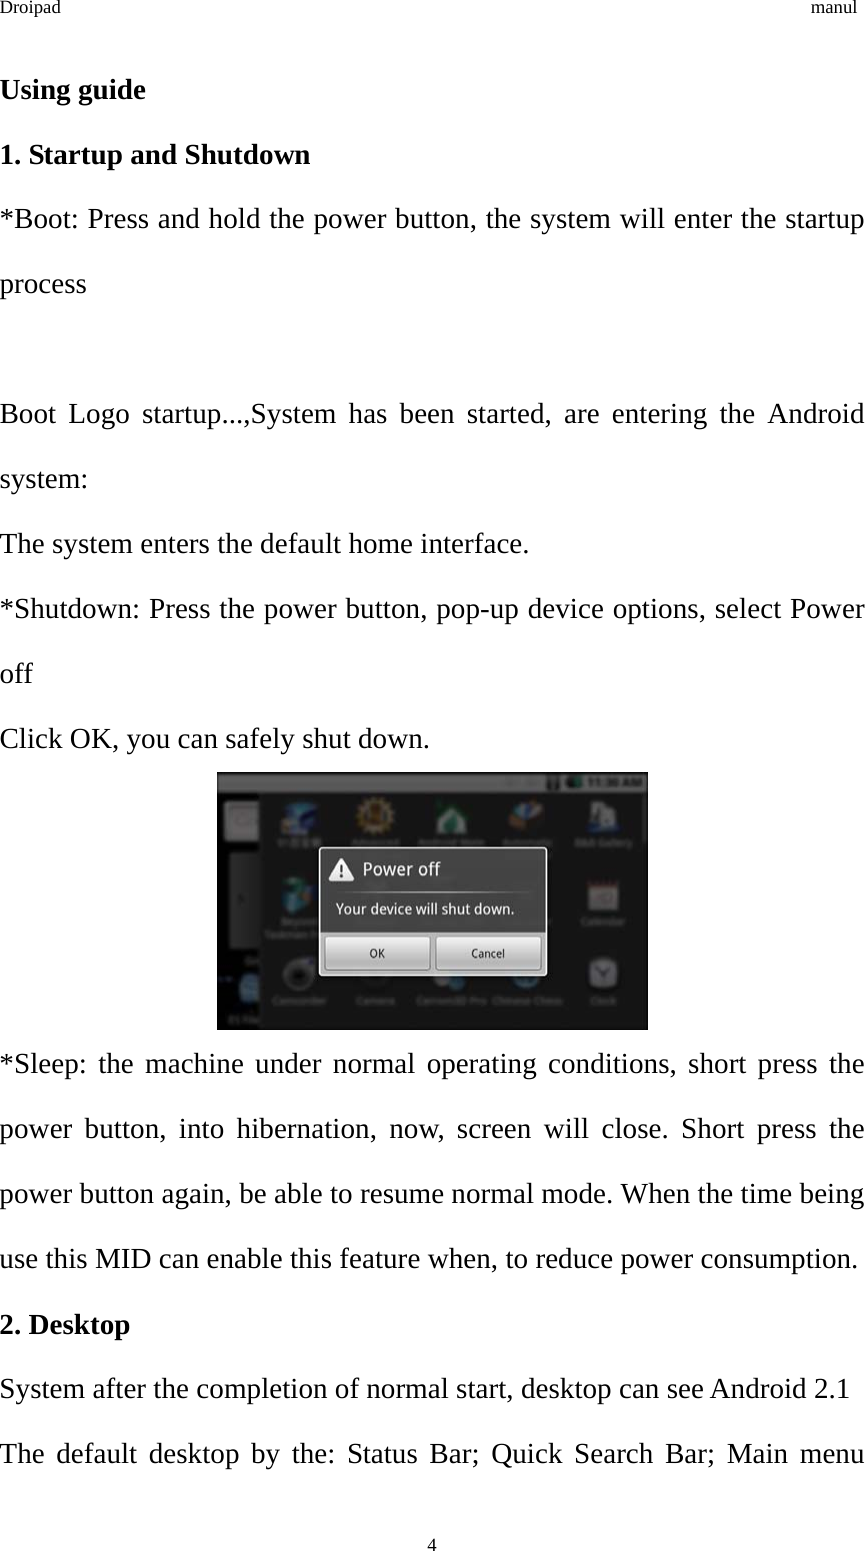 Droipad                                                                                manul Using guide 1. Startup and Shutdown *Boot: Press and hold the power button, the system will enter the startup process  Boot Logo startup...,System has been started, are entering the Android system: The system enters the default home interface. *Shutdown: Press the power button, pop-up device options, select Power off Click OK, you can safely shut down.  *Sleep: the machine under normal operating conditions, short press the power button, into hibernation, now, screen will close. Short press the power button again, be able to resume normal mode. When the time being use this MID can enable this feature when, to reduce power consumption. 2. Desktop System after the completion of normal start, desktop can see Android 2.1 The default desktop by the: Status Bar; Quick Search Bar; Main menu  4